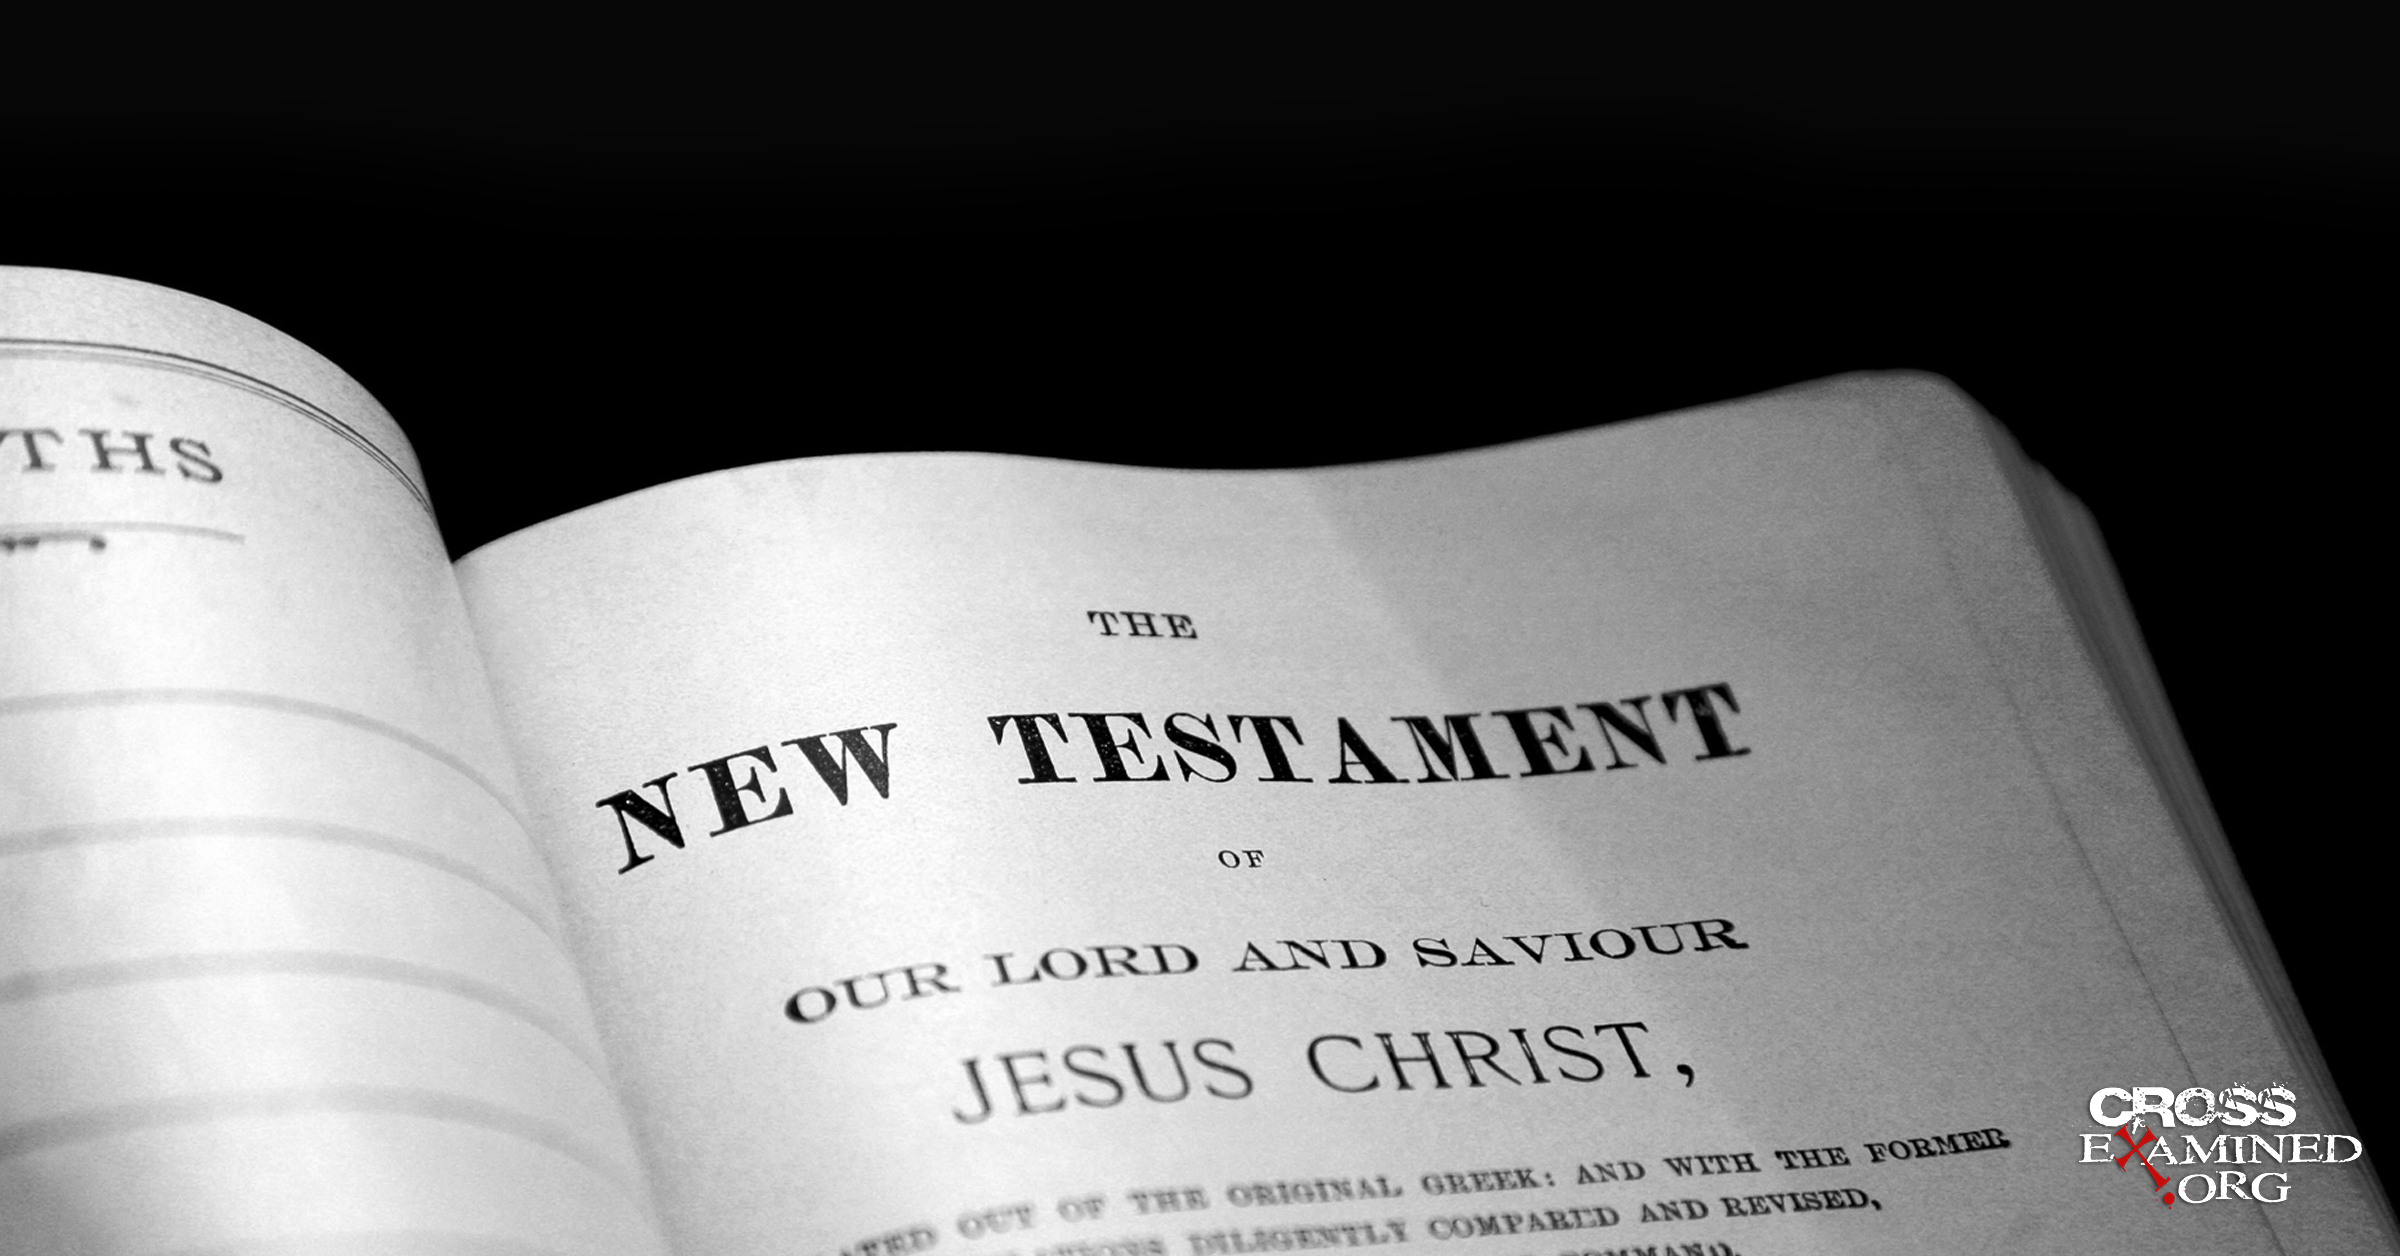 12 Reasons to Trust The New Testament